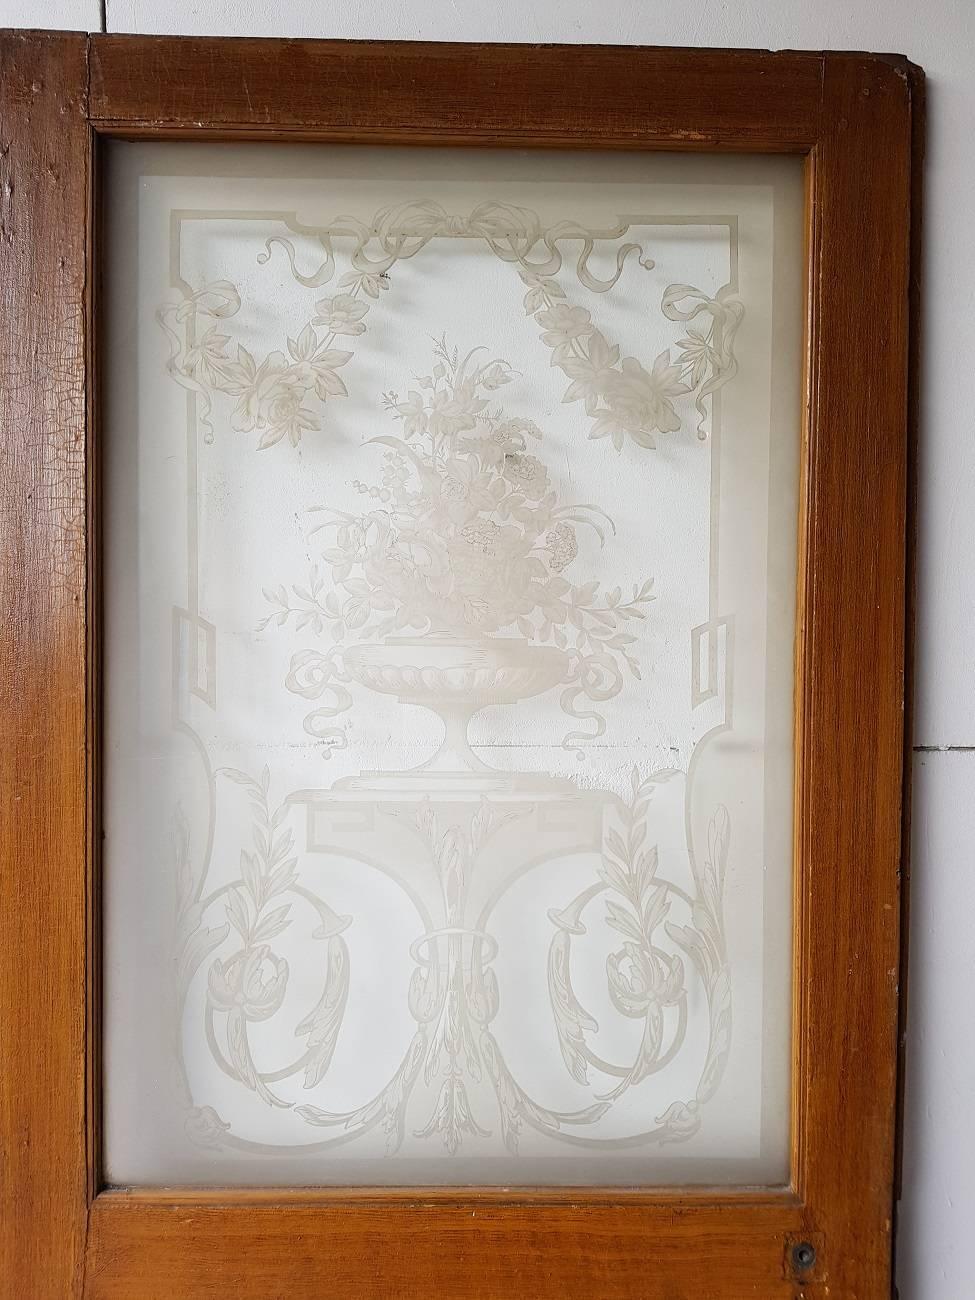 Old Dutch wooden door from the late 19th century with painted wood design and stunning etched glass panel depicting flowers in a vase standing on a console and around richly decorated with garlands and curls.

The measurements are,
Depth 3 cm/